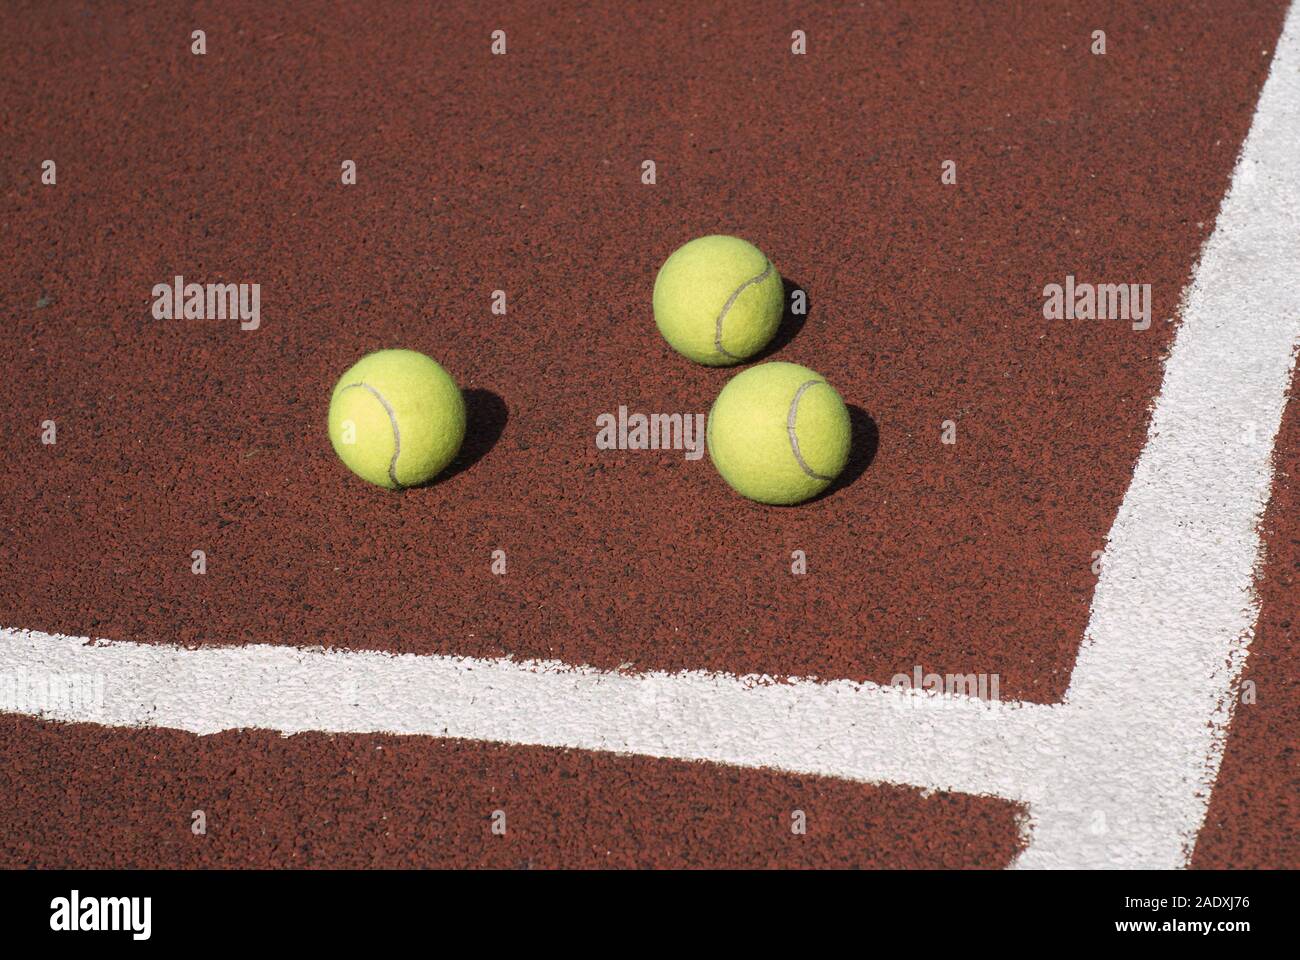 Three tennis balls on brown synthetic court outdoors top view Stock Photo